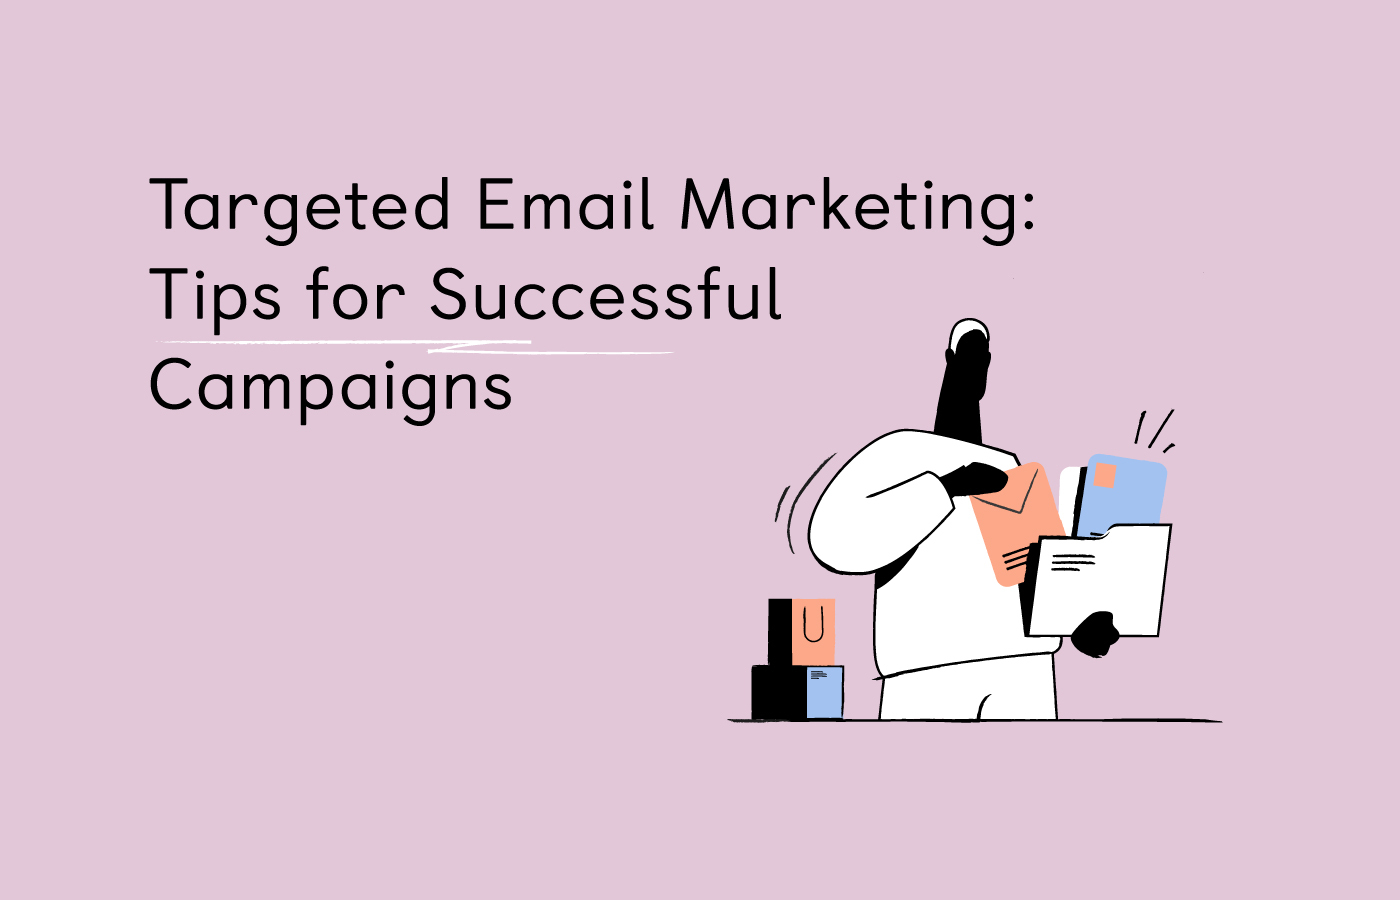 Targeted Email Marketing: Tips for Successful Campaigns